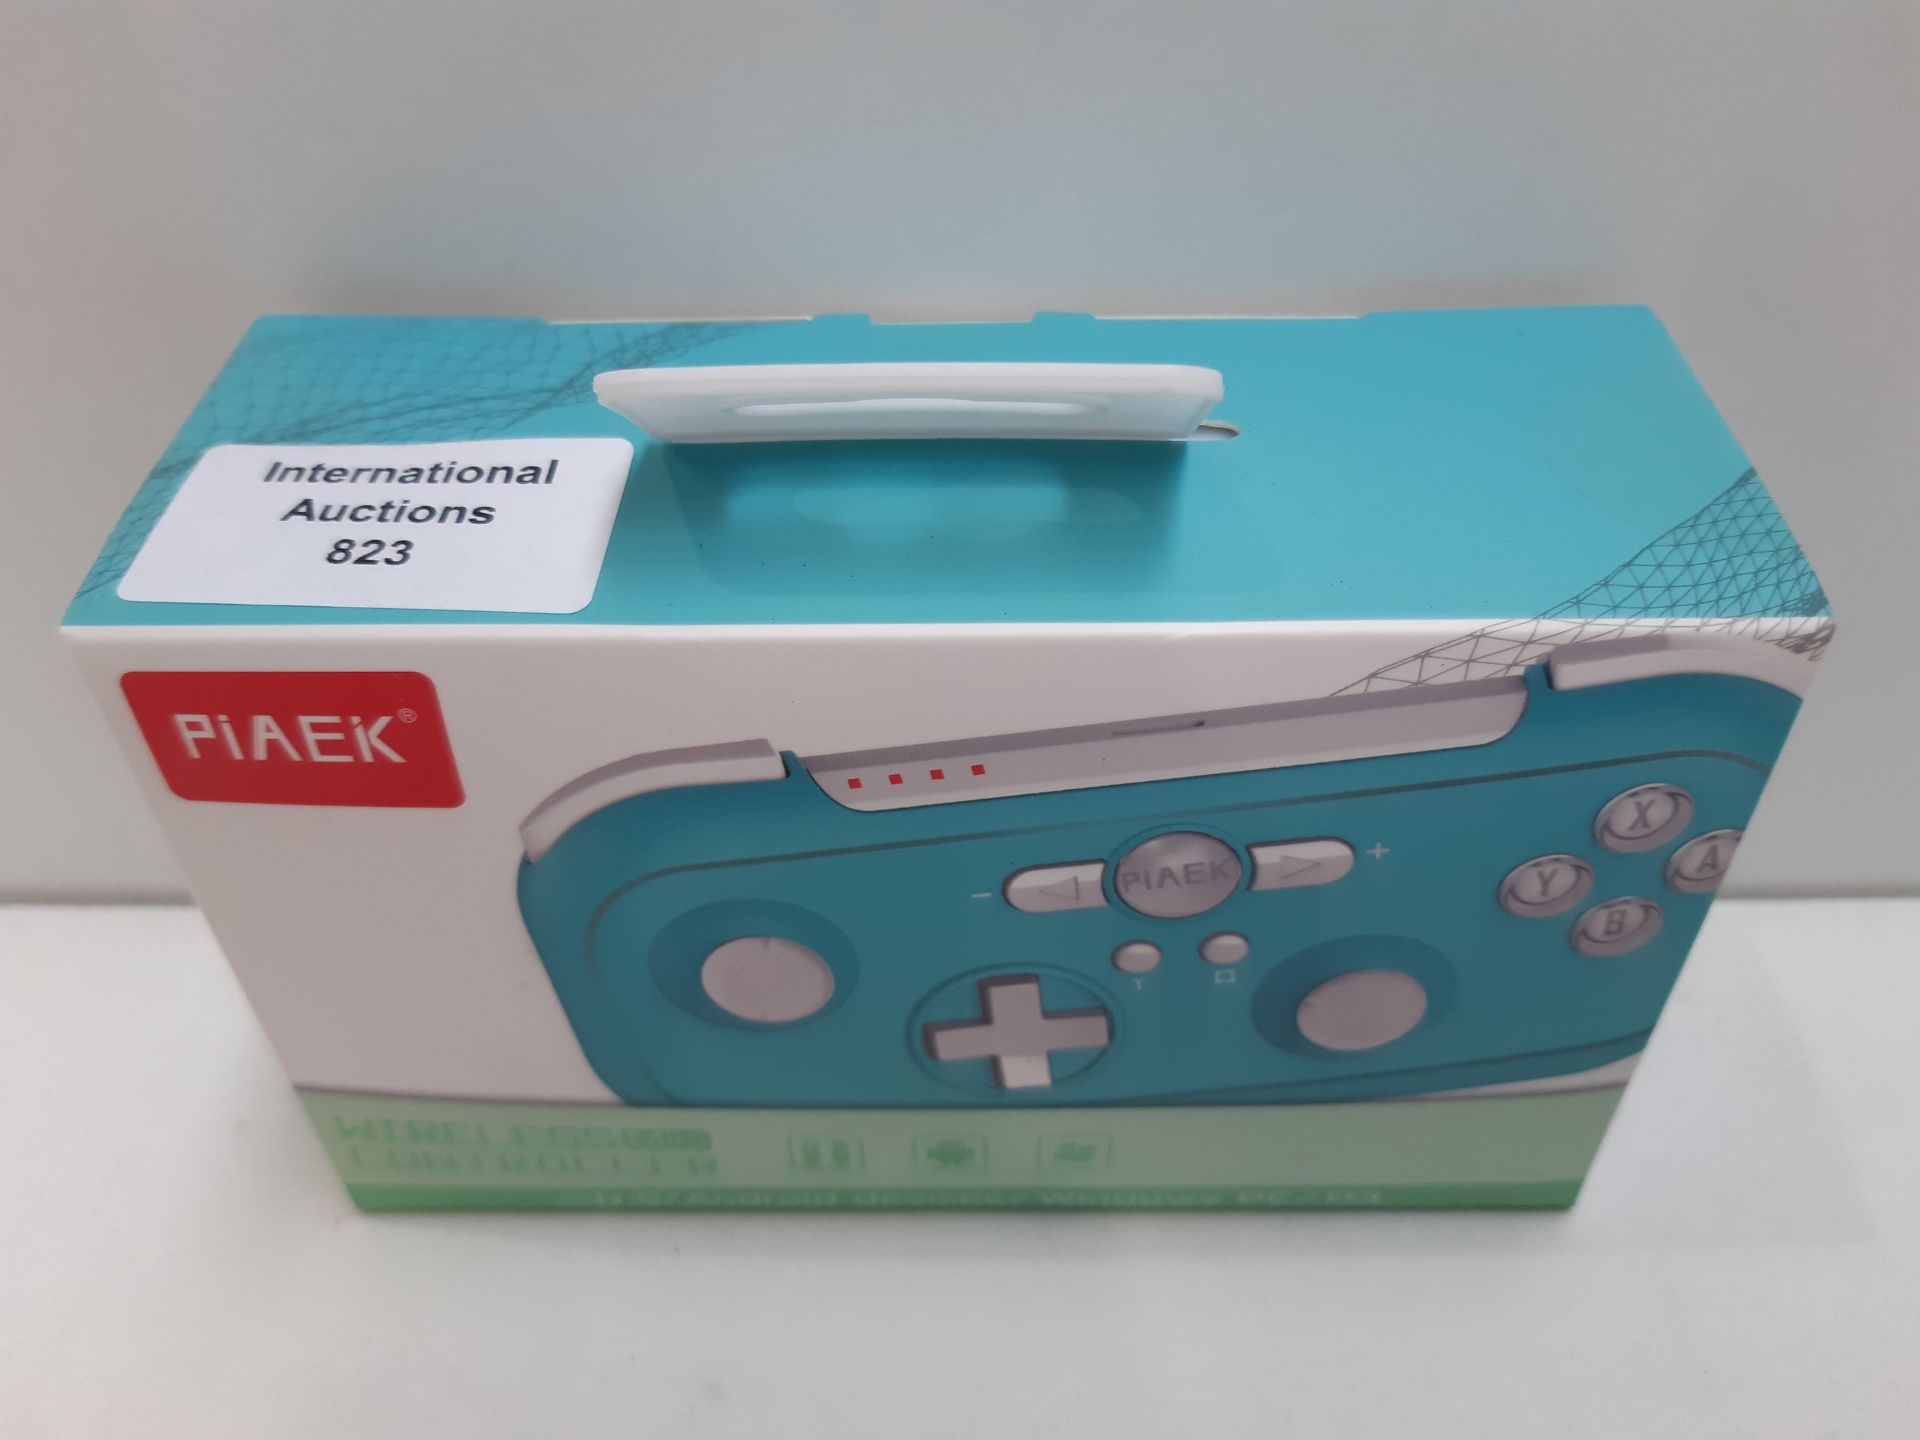 RRP £14.99 PiAEK Controller for Nintendo Switch 6-Axis sensor - Image 2 of 2